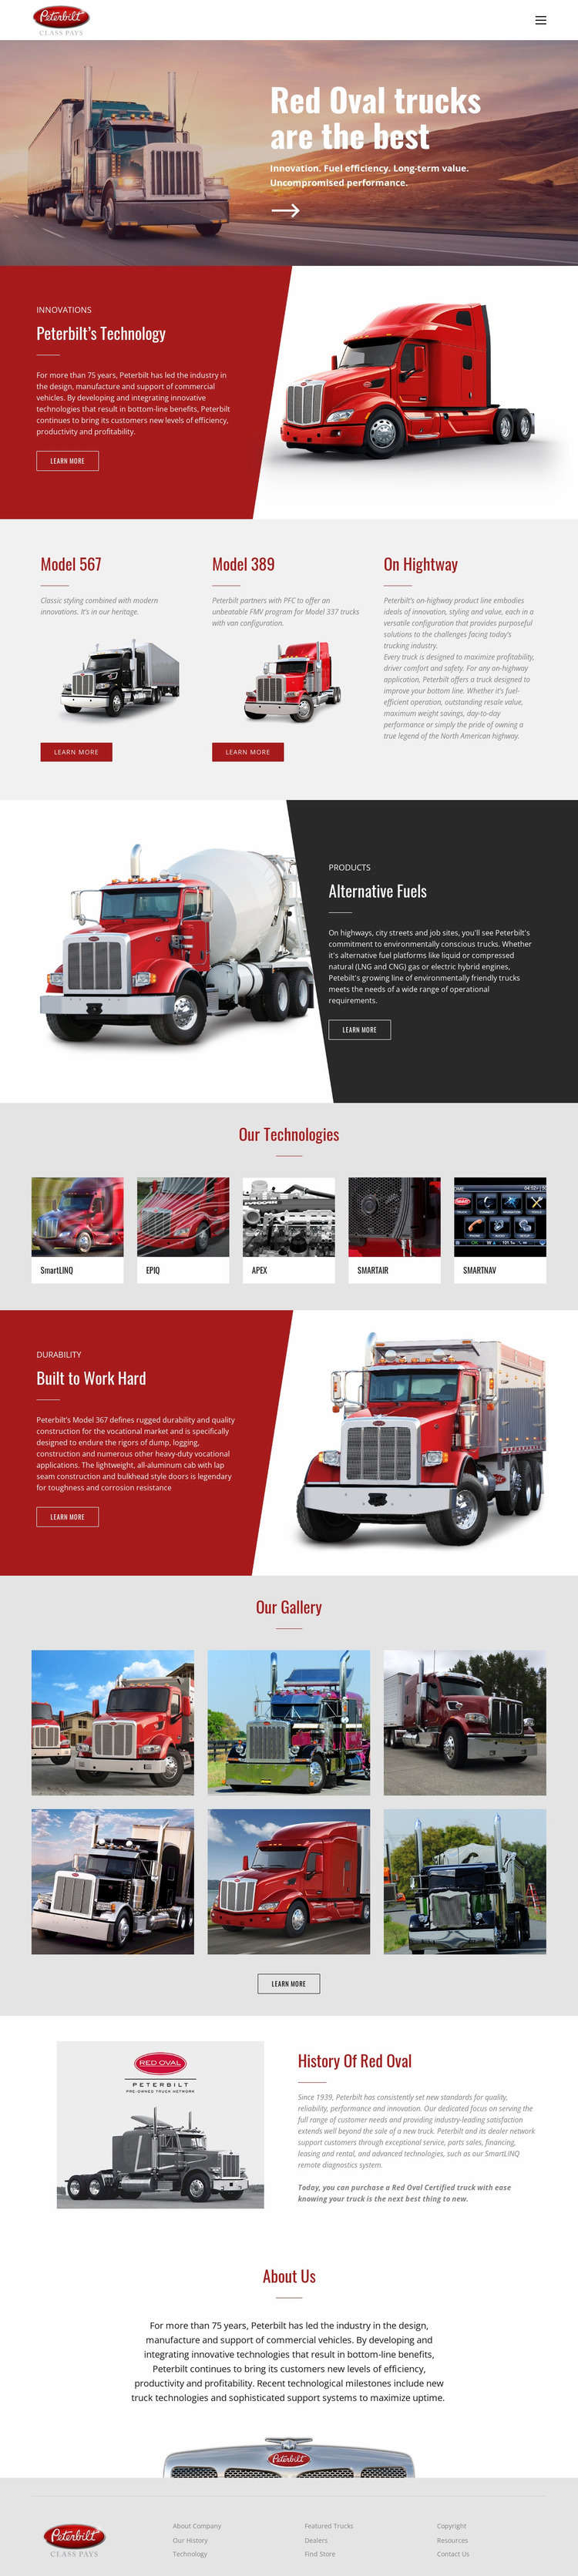 Red oval truck transportaion Website Mockup